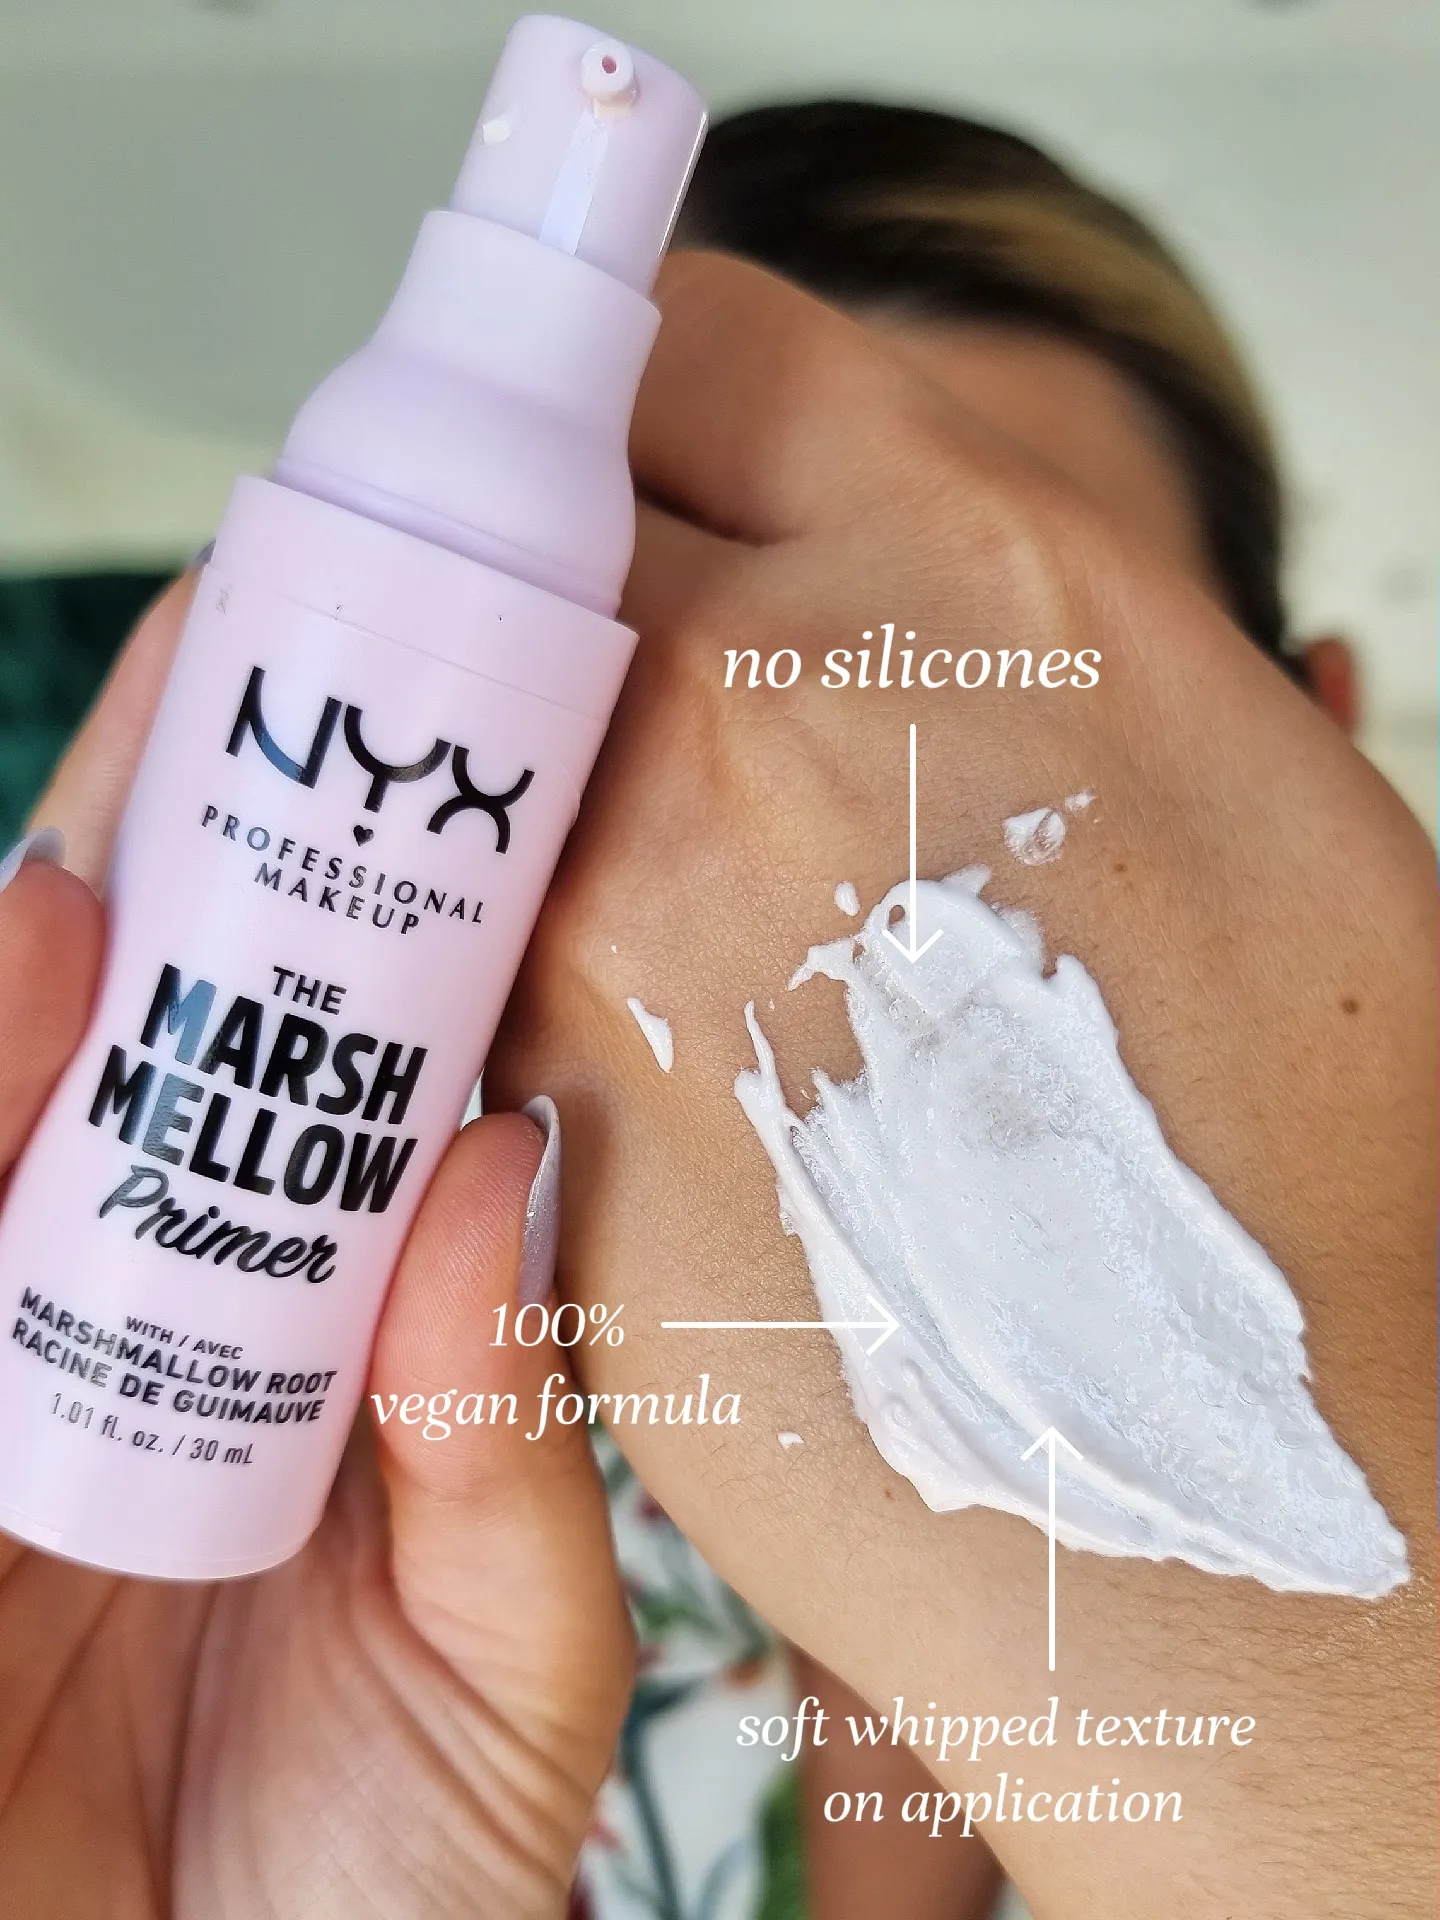 Professional Lemon8 posted by NYX Andrada_MUA Primer Marshmellow Gallery 🌸✨ | |